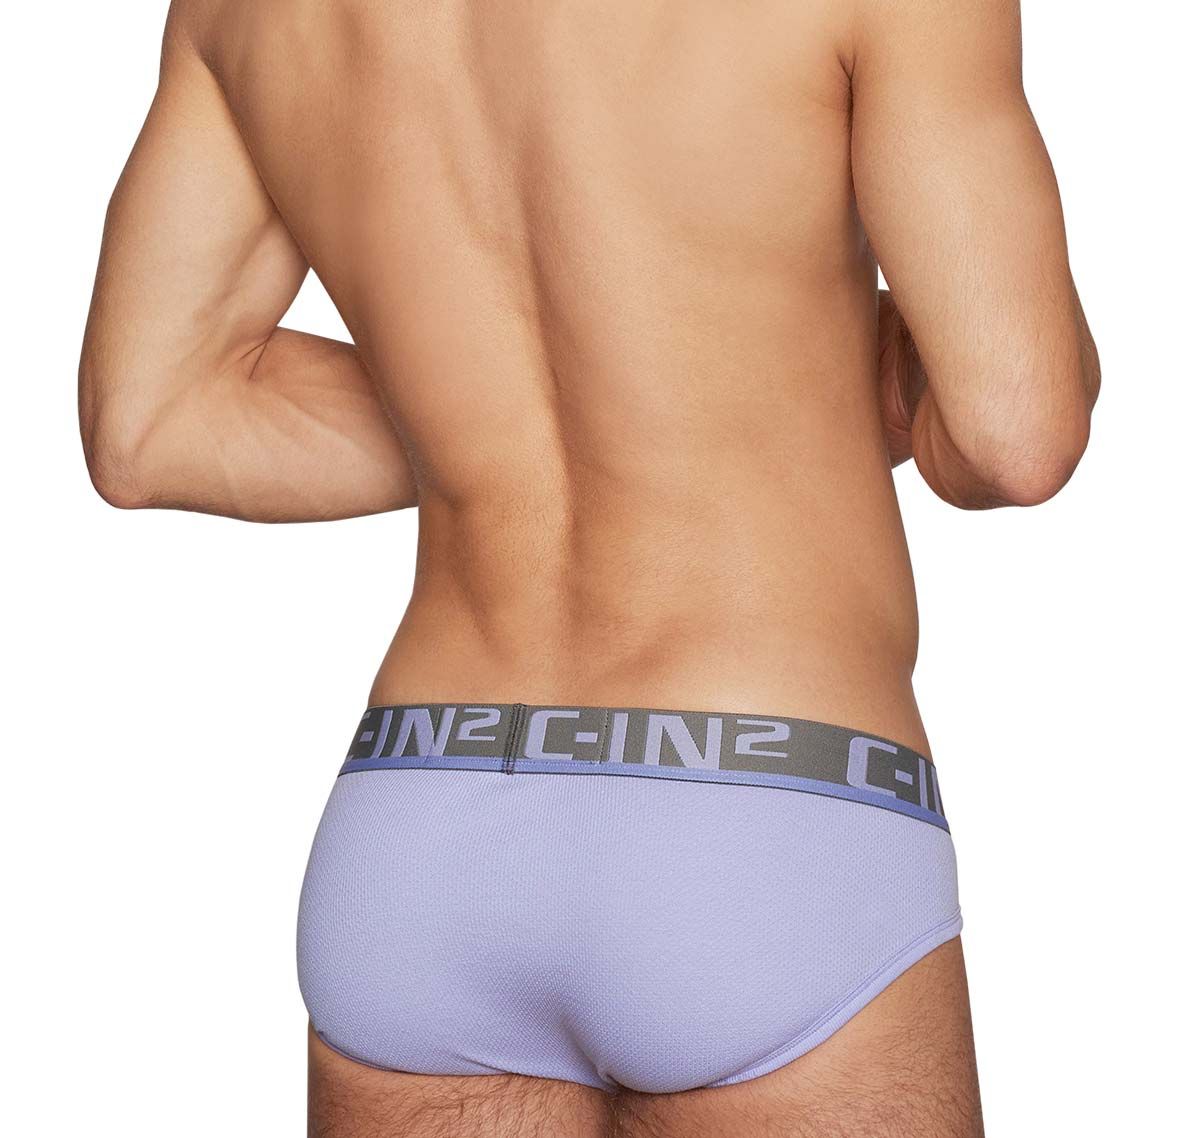 C-IN2 Slip C-Theory LOW RISE BRIEF 8013-451B, violet